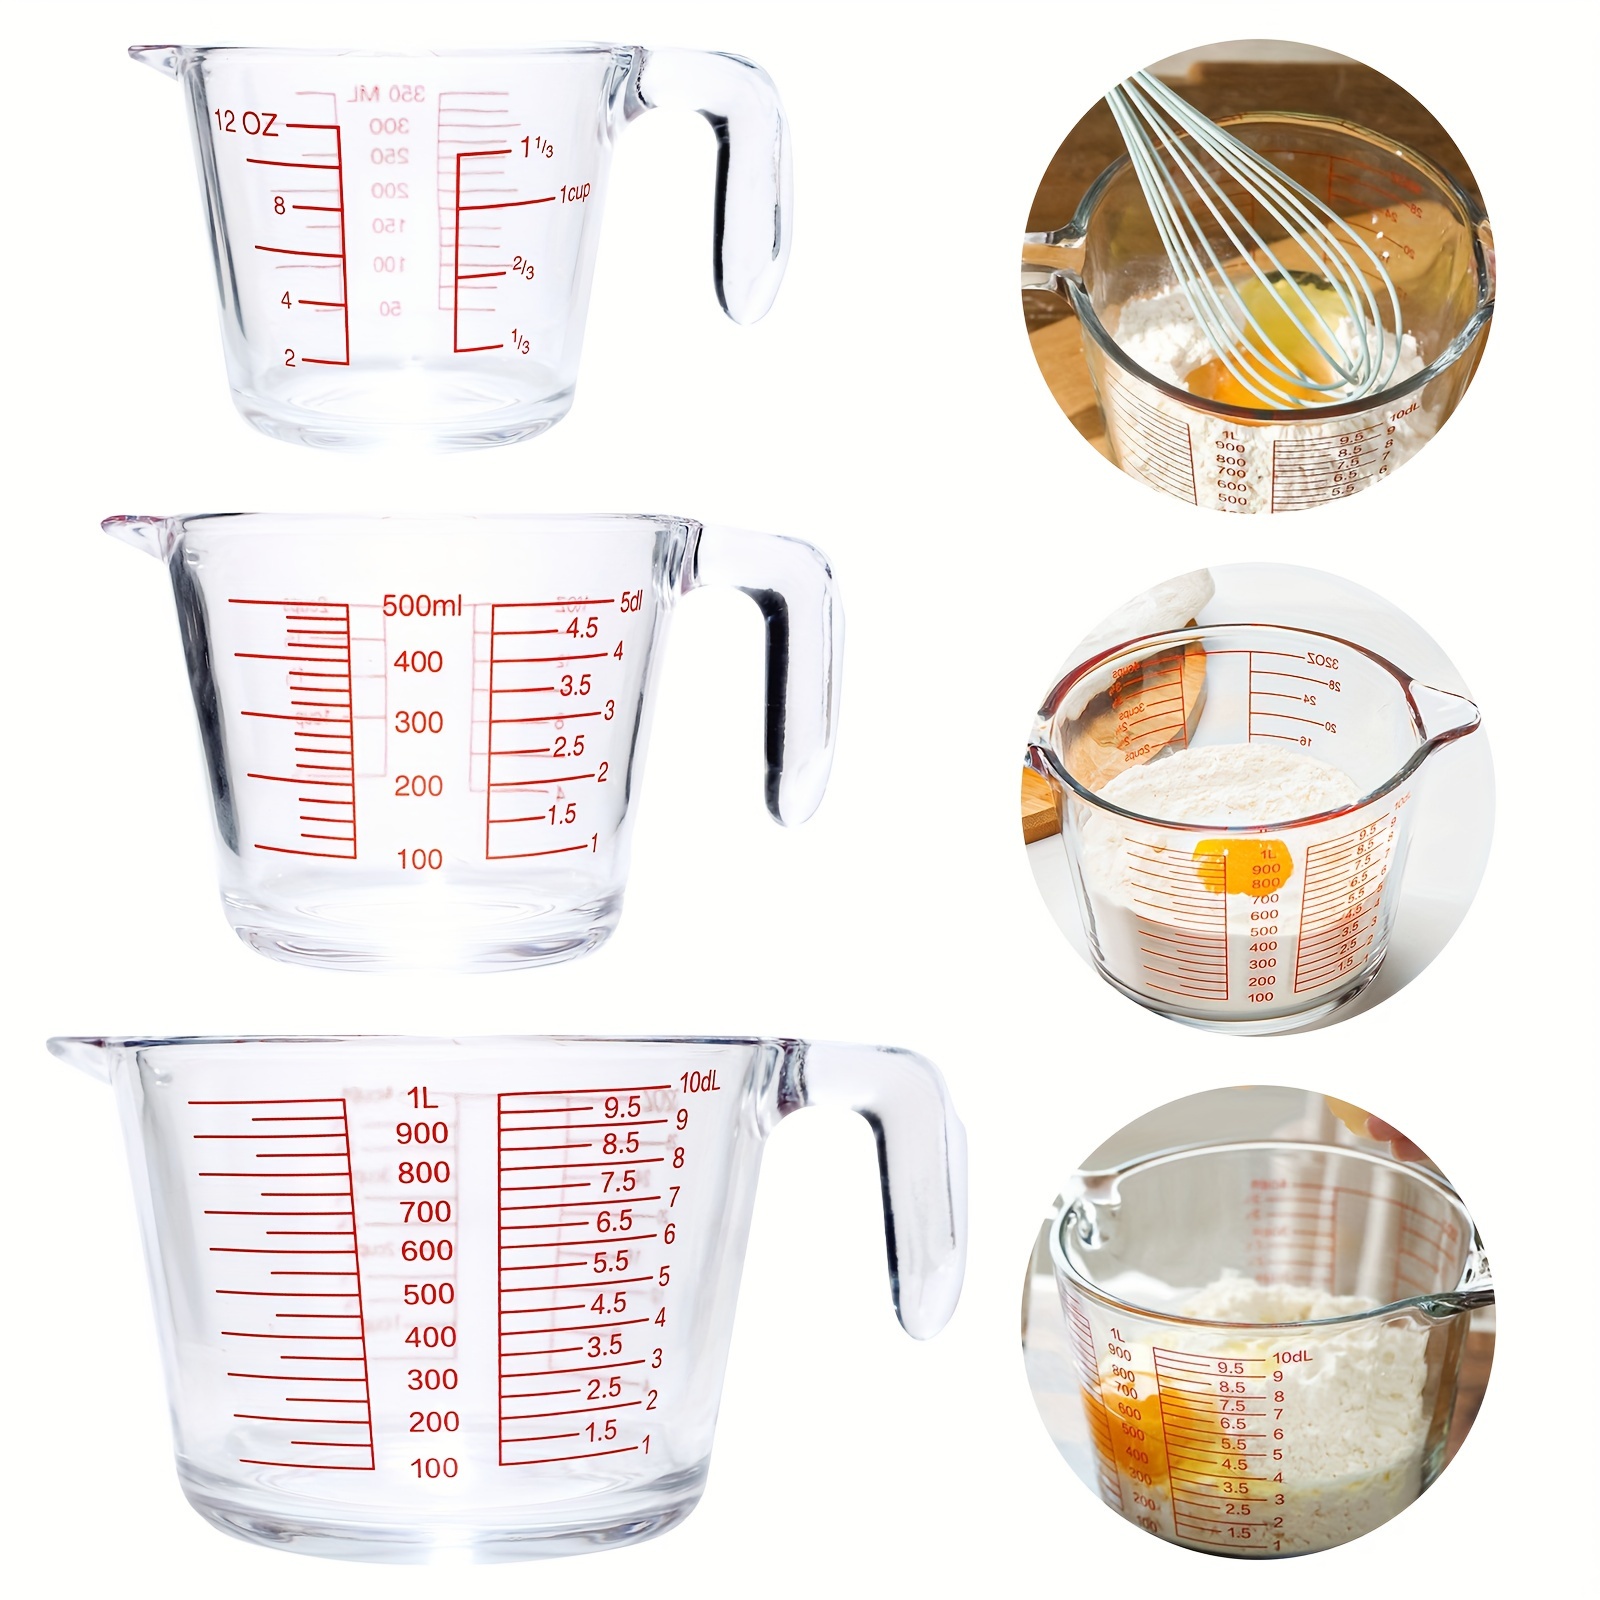 

Measuring Cup - 1/3 Piece Glass Measuring Cup Set, Borosilicate Glass Measuring Cup, Dishwasher, Refrigerator, Microwave & Preheated Oven, Essential Kitchen Tools, 350/500/1000ml